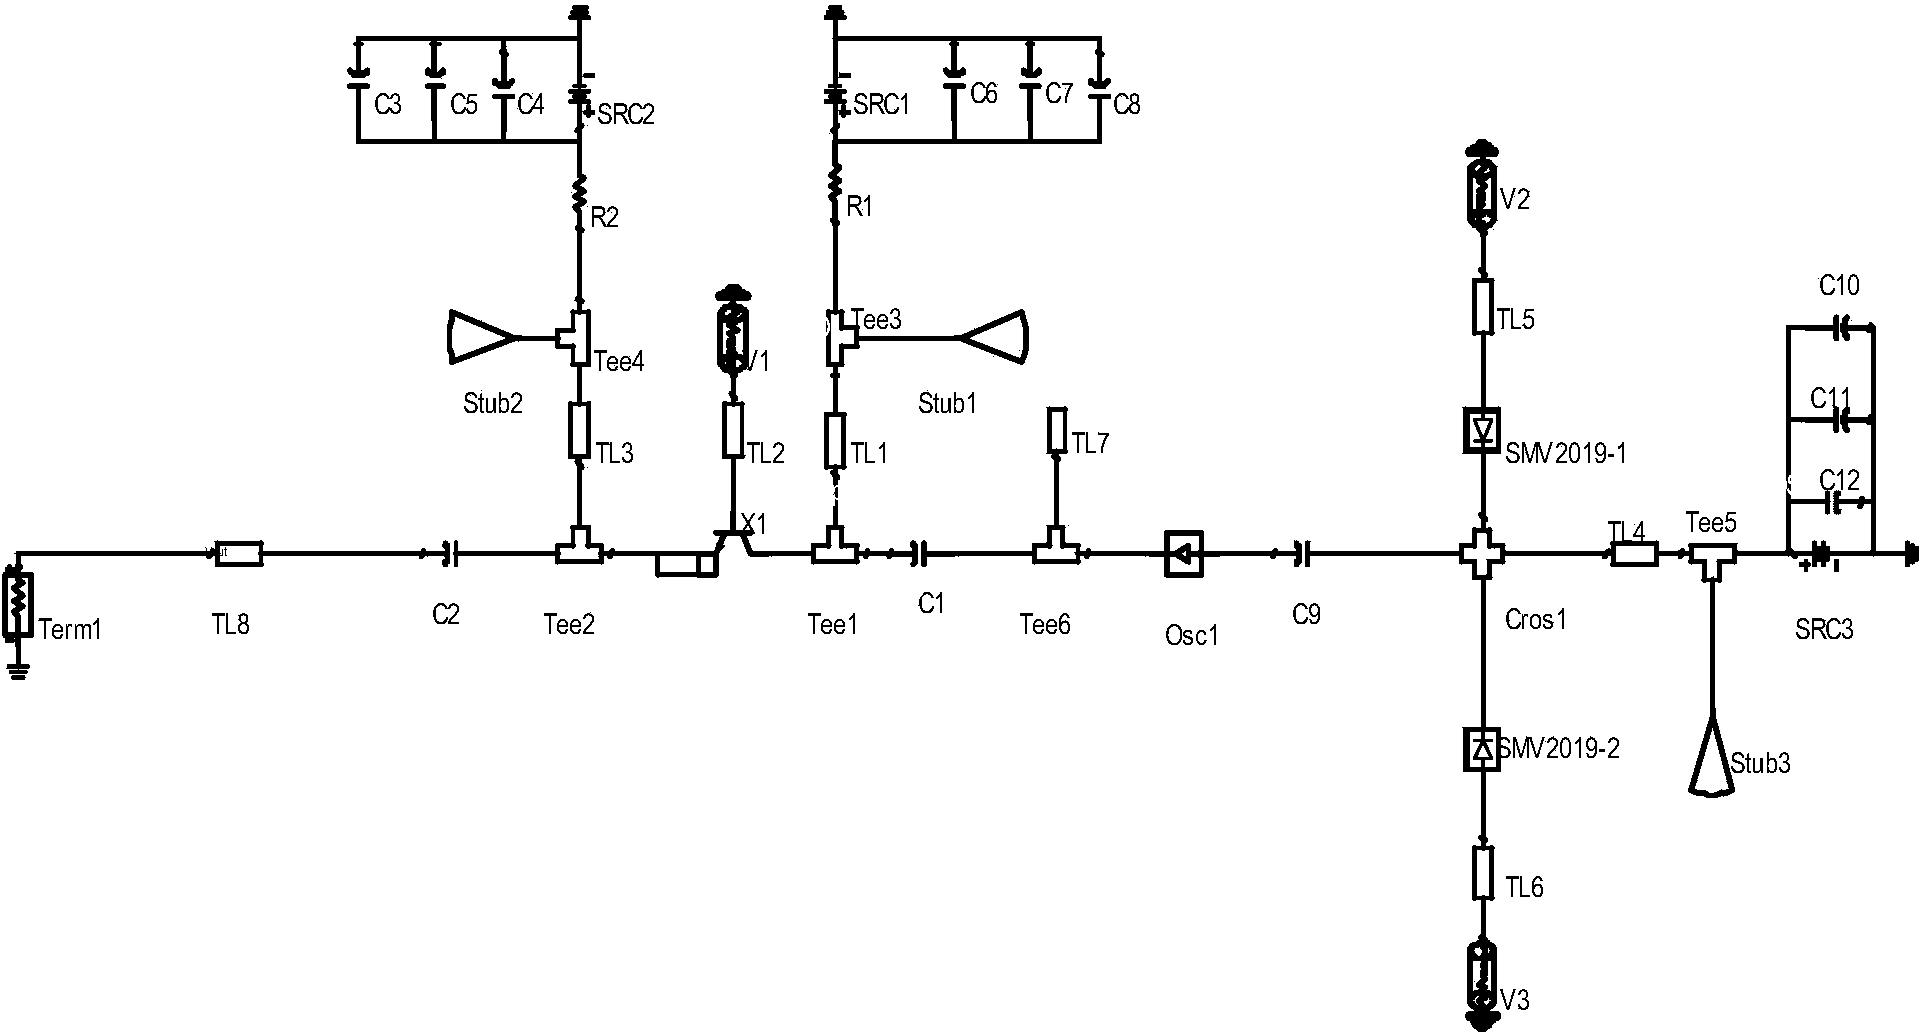 C wave band voltage-controlled oscillator